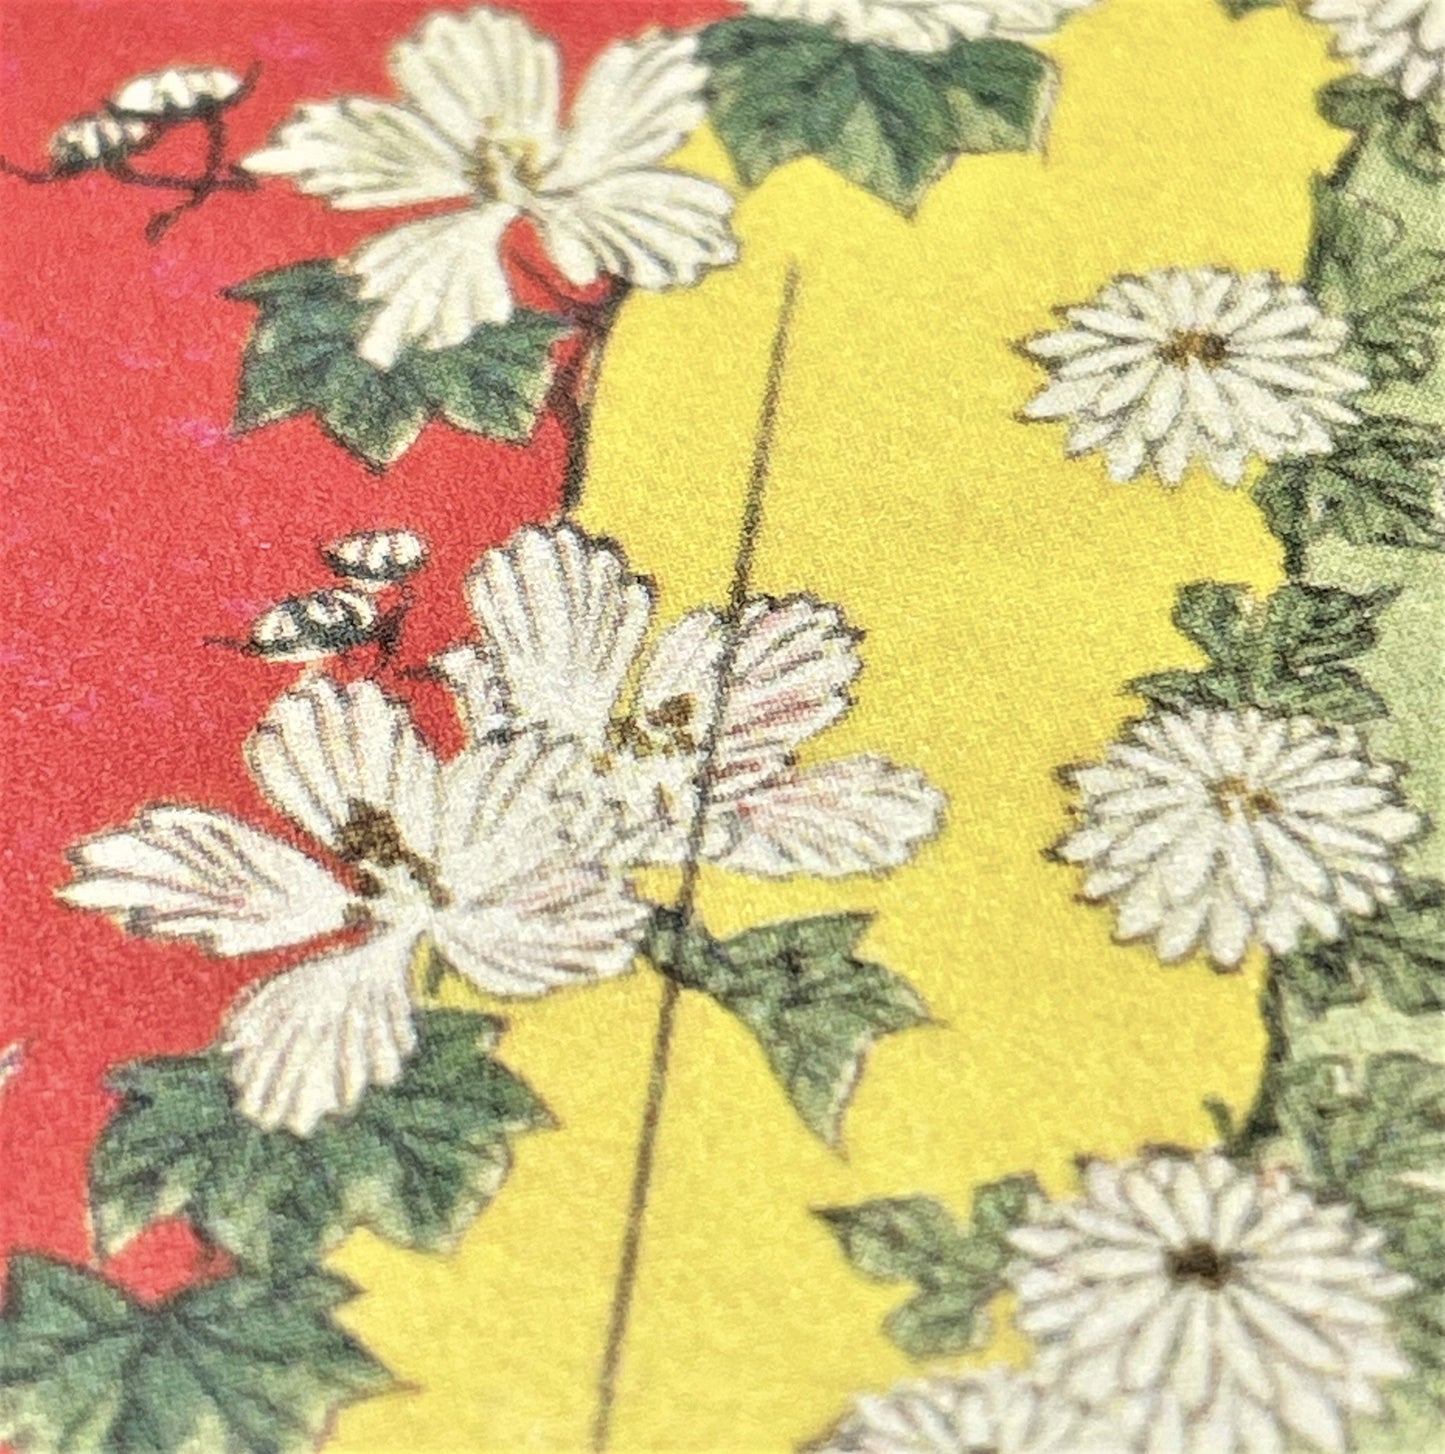 greetings card of a drawing of a bright floral kimono in red, yellow. green and lilac, close up of the pattern